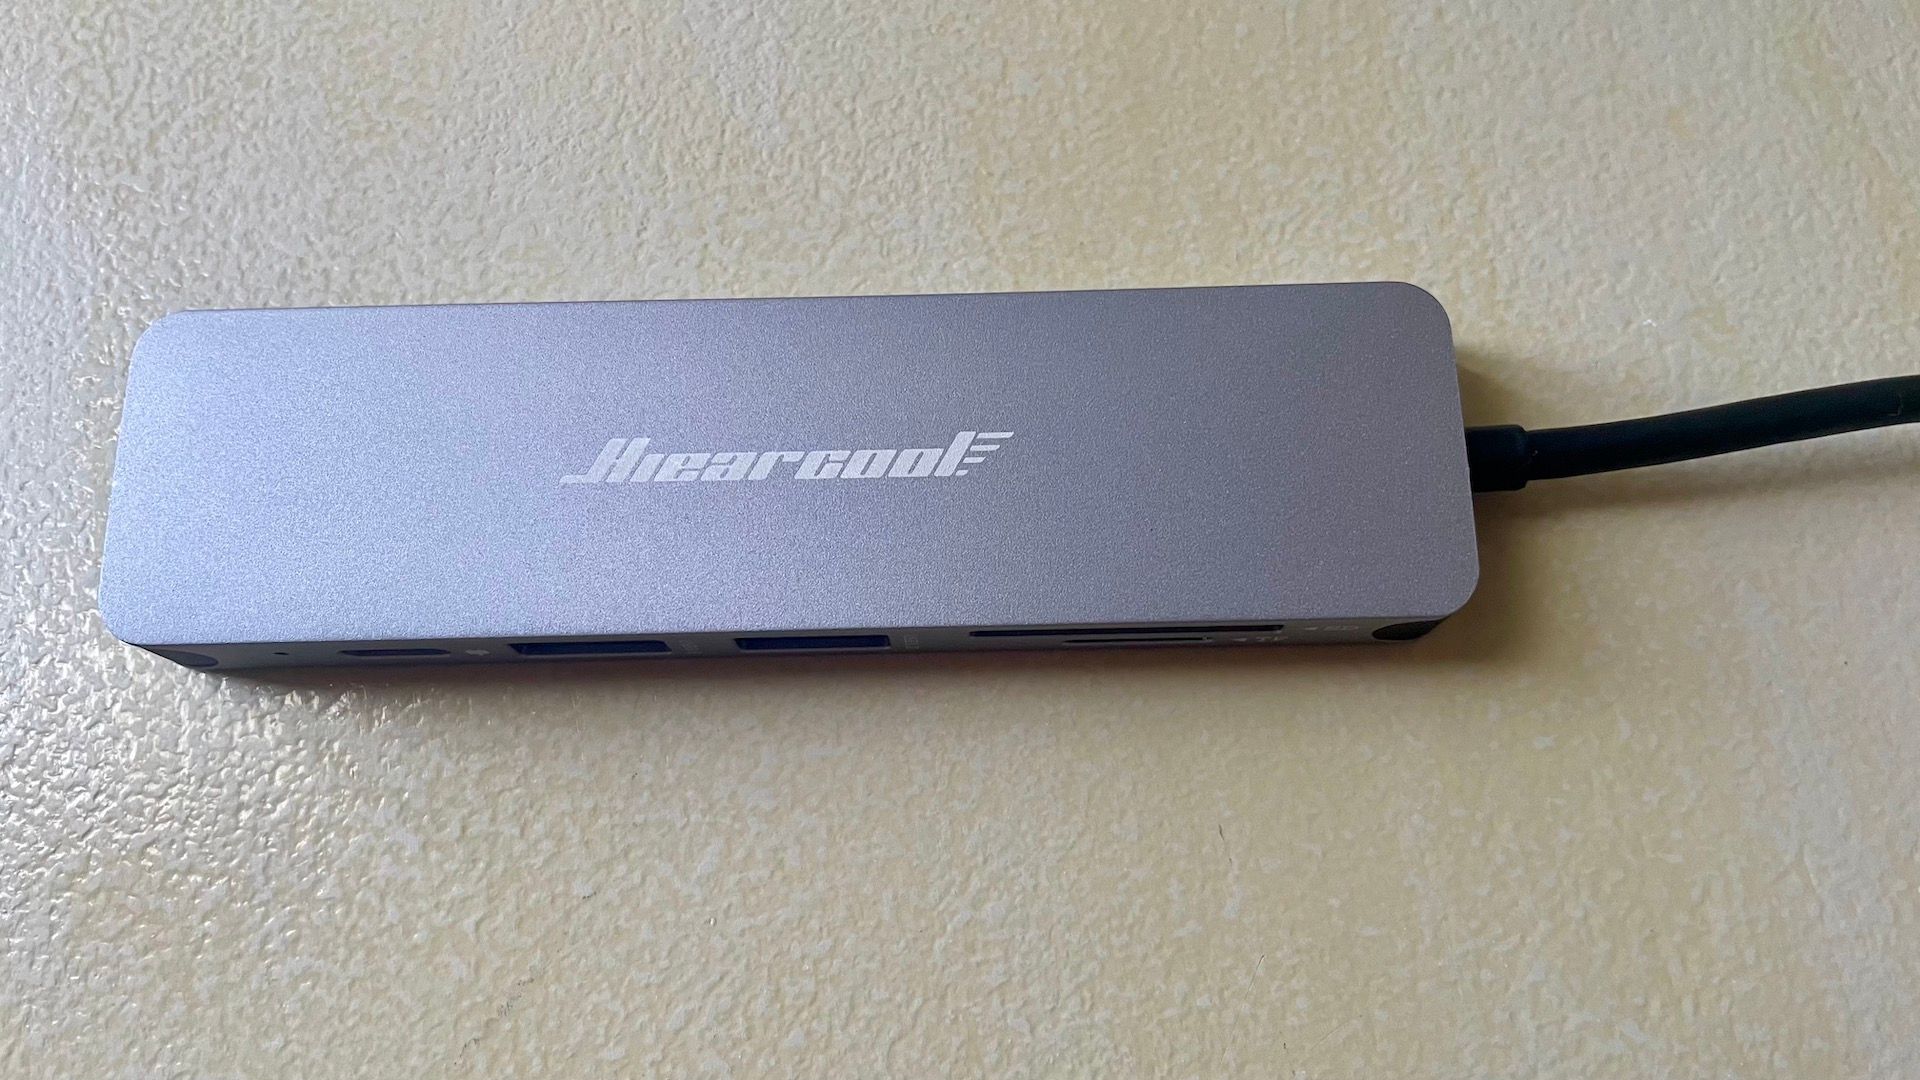 The top of the Hiearcool USB-C adapter.